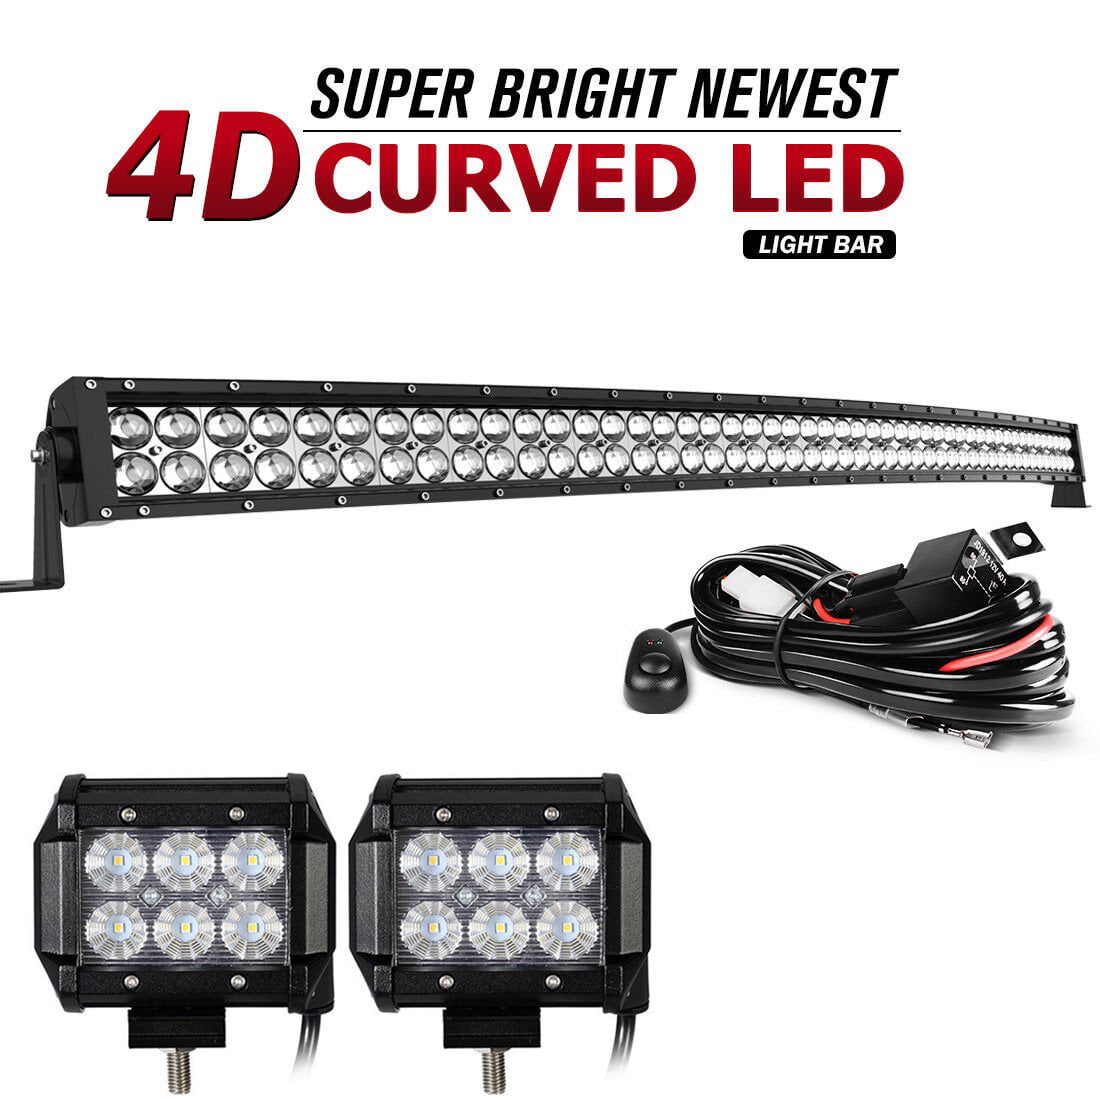 Led Light Bar Curved T-Former 52 Inch 20/22 Inch Spot Flood Combo Beam Led Bars 4Pcs 4 Inch 60W Offroad Driving Fog Lights W/ Rocker Switch Wiring Harness Kit for Jeep Tucks Polaris Boats